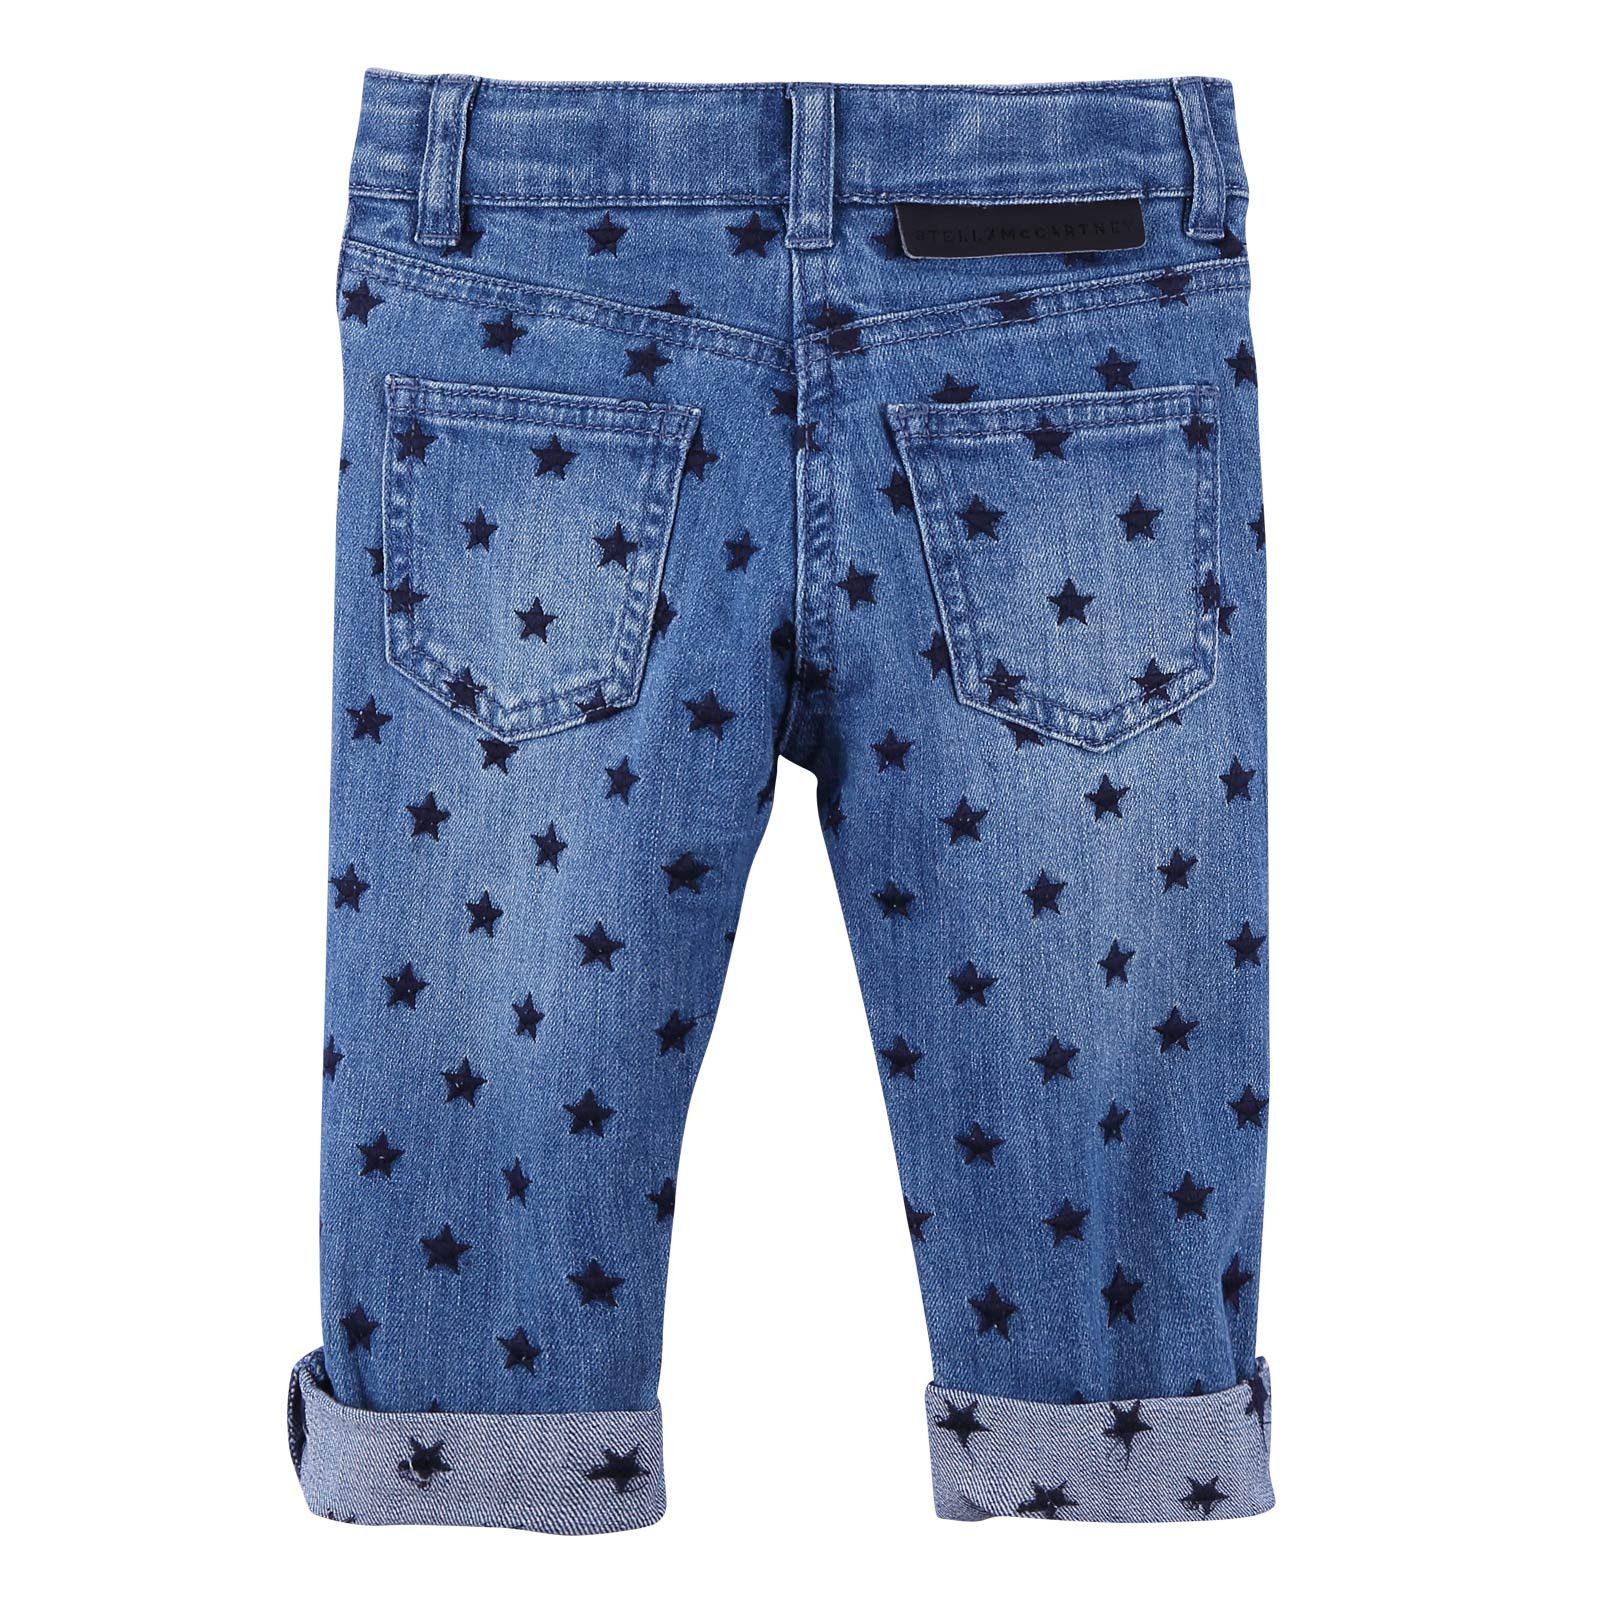 Girls Blue Stretch Denim Jeans With Star Embroidered Trims - CÉMAROSE | Children's Fashion Store - 2